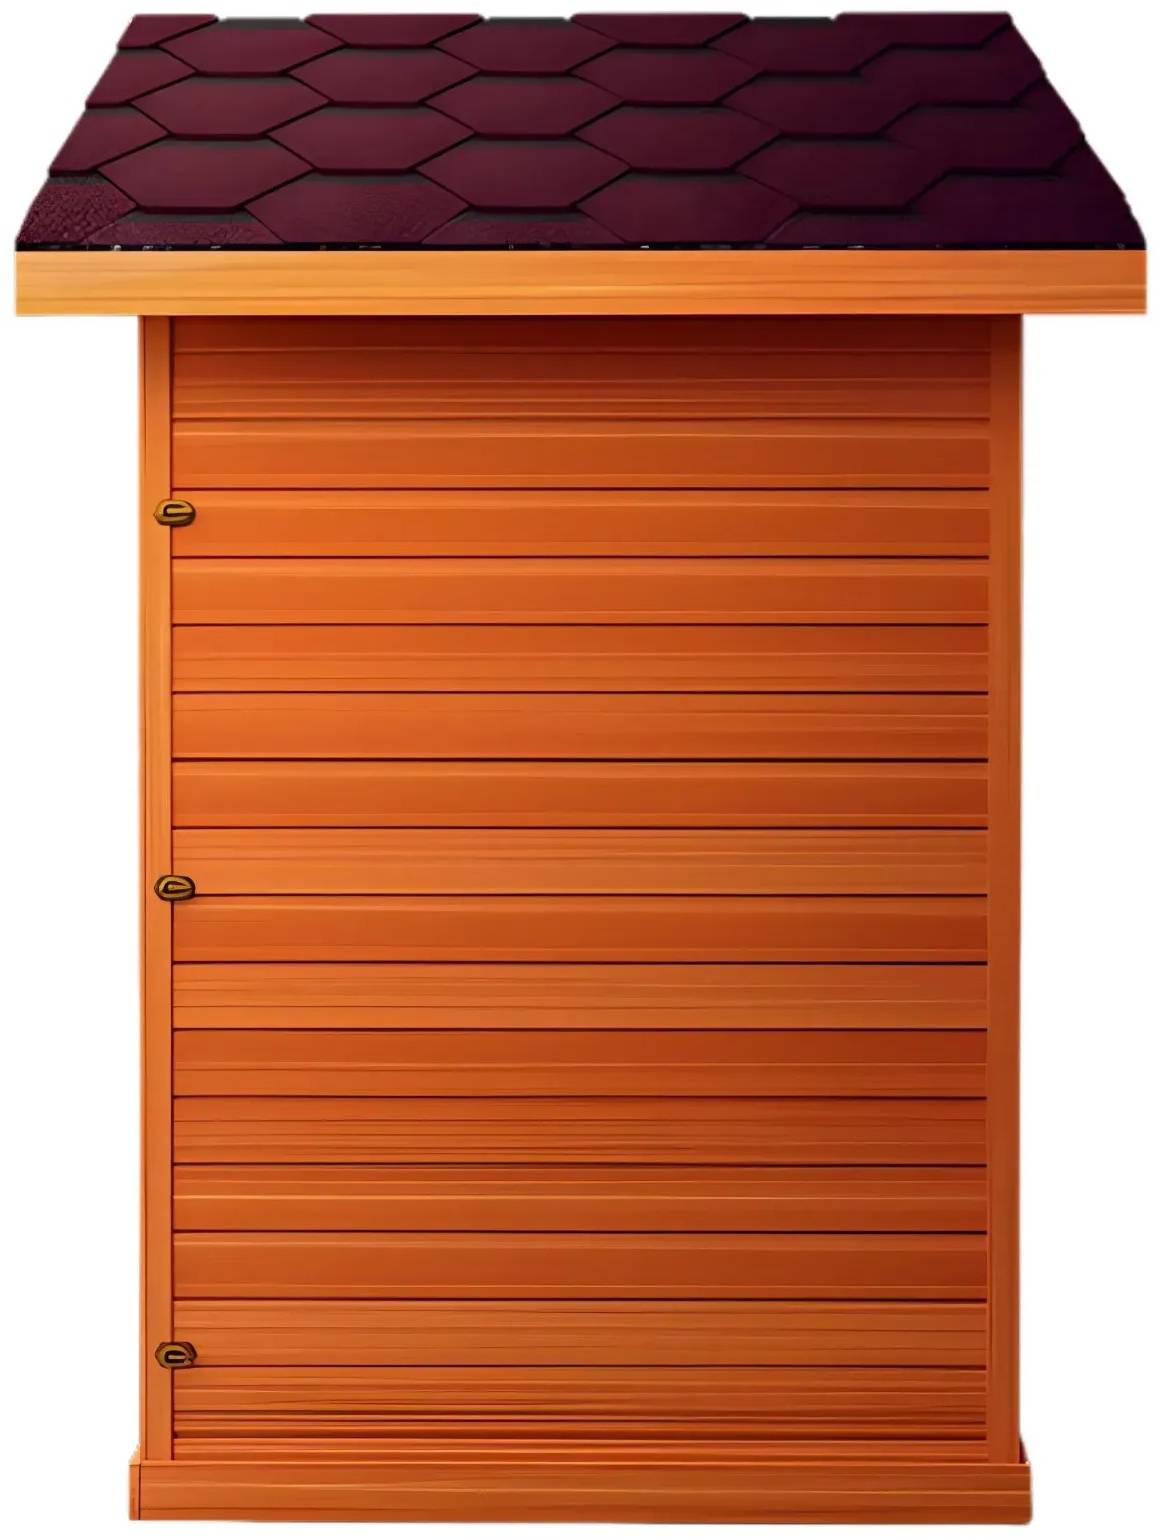 ZiahCare's Medical Saunas 2 Person Outdoor Full Spectrum Infrared Sauna Nature 5 Mockup Image 4